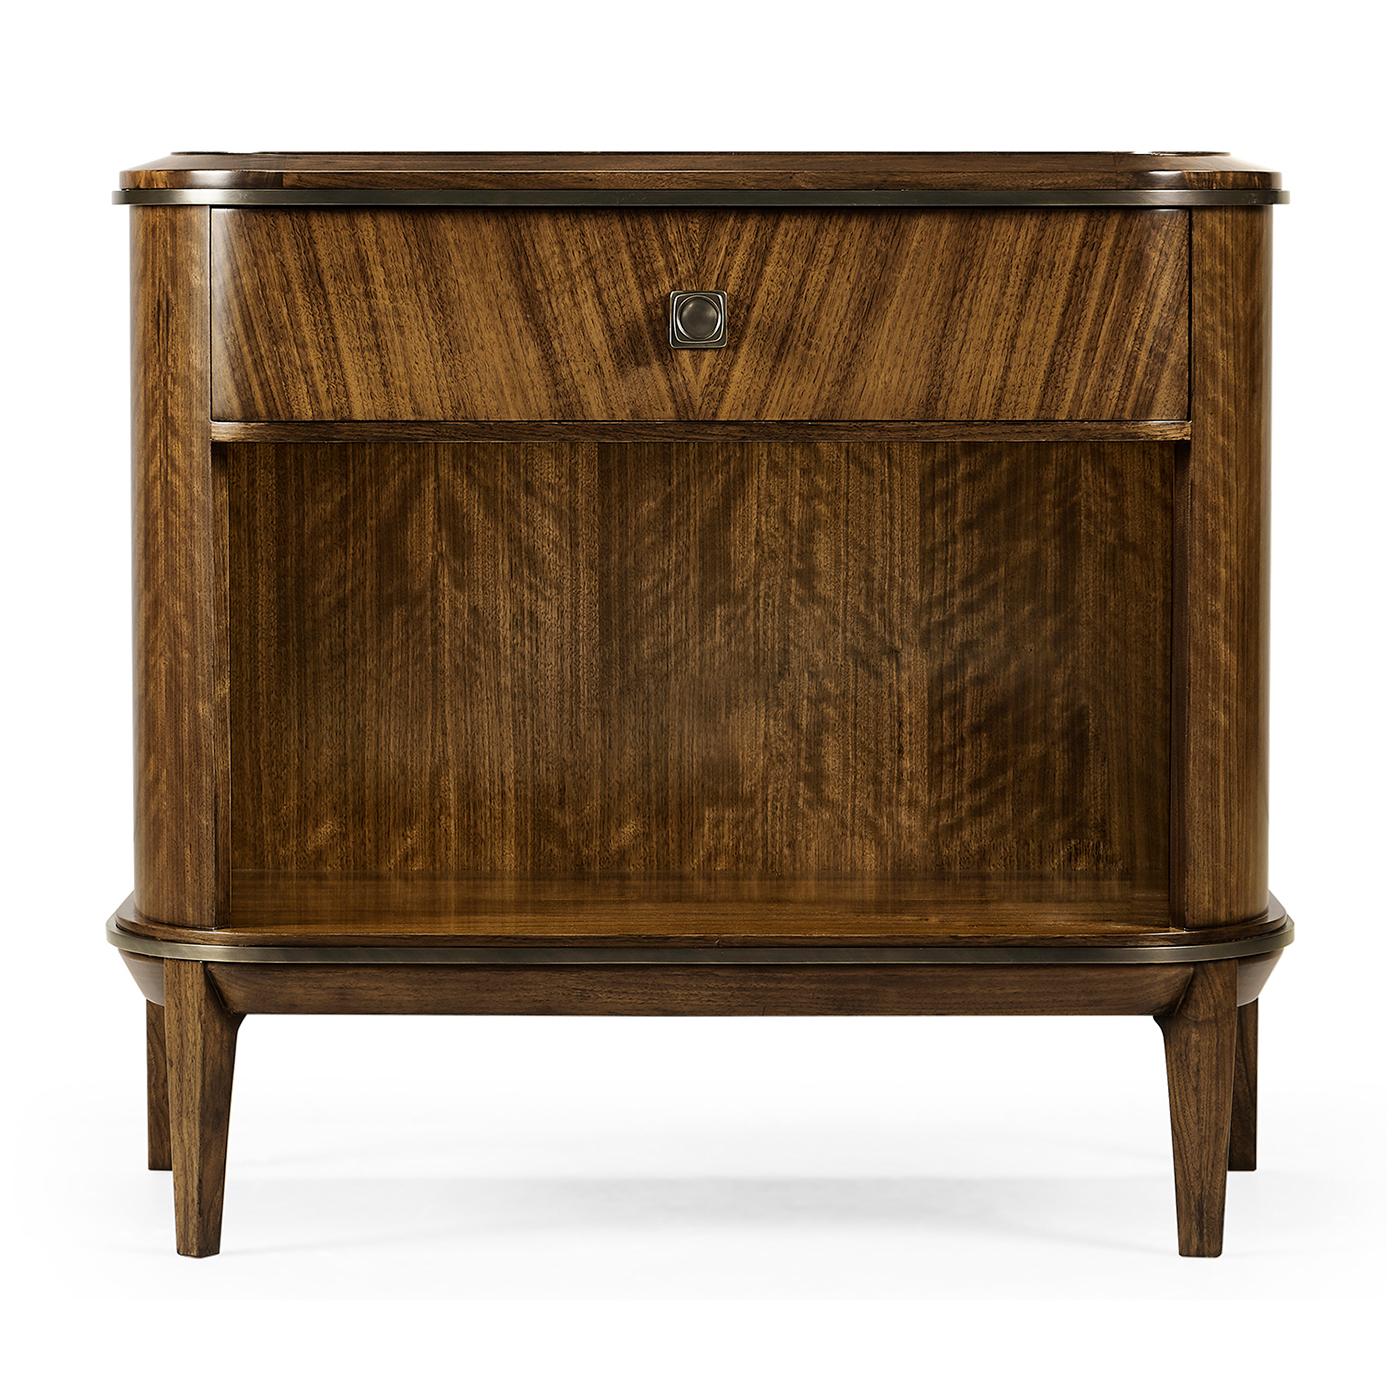 Mid century style D form nightstand, constructed of American walnut with a transparent, hand-rubbed finish. The drawer fronts feature walnut veneers in a box match styling and the hardware is cast brass, acid dipped and hand-rubbed to achieve a